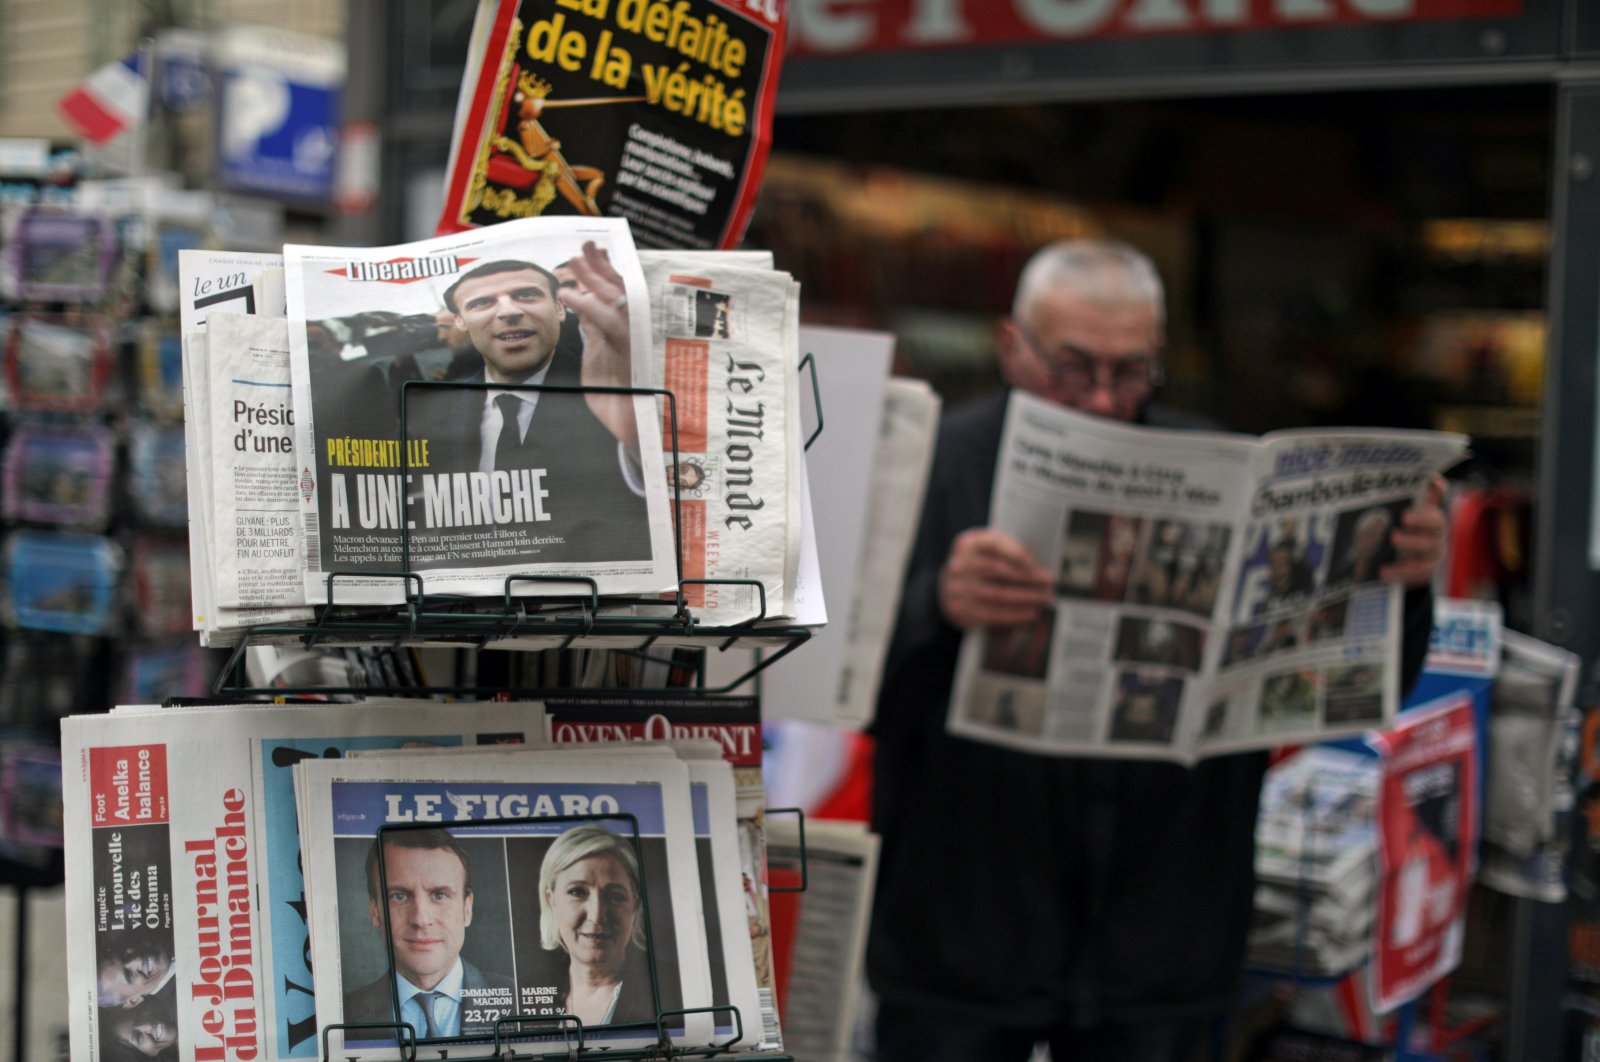 A man reads the local newspaper near a rack which displays copies of French daily newspapers with front pages about the results in France's Presidential election in Nice April 24, 2017. (REUTERS Photo)